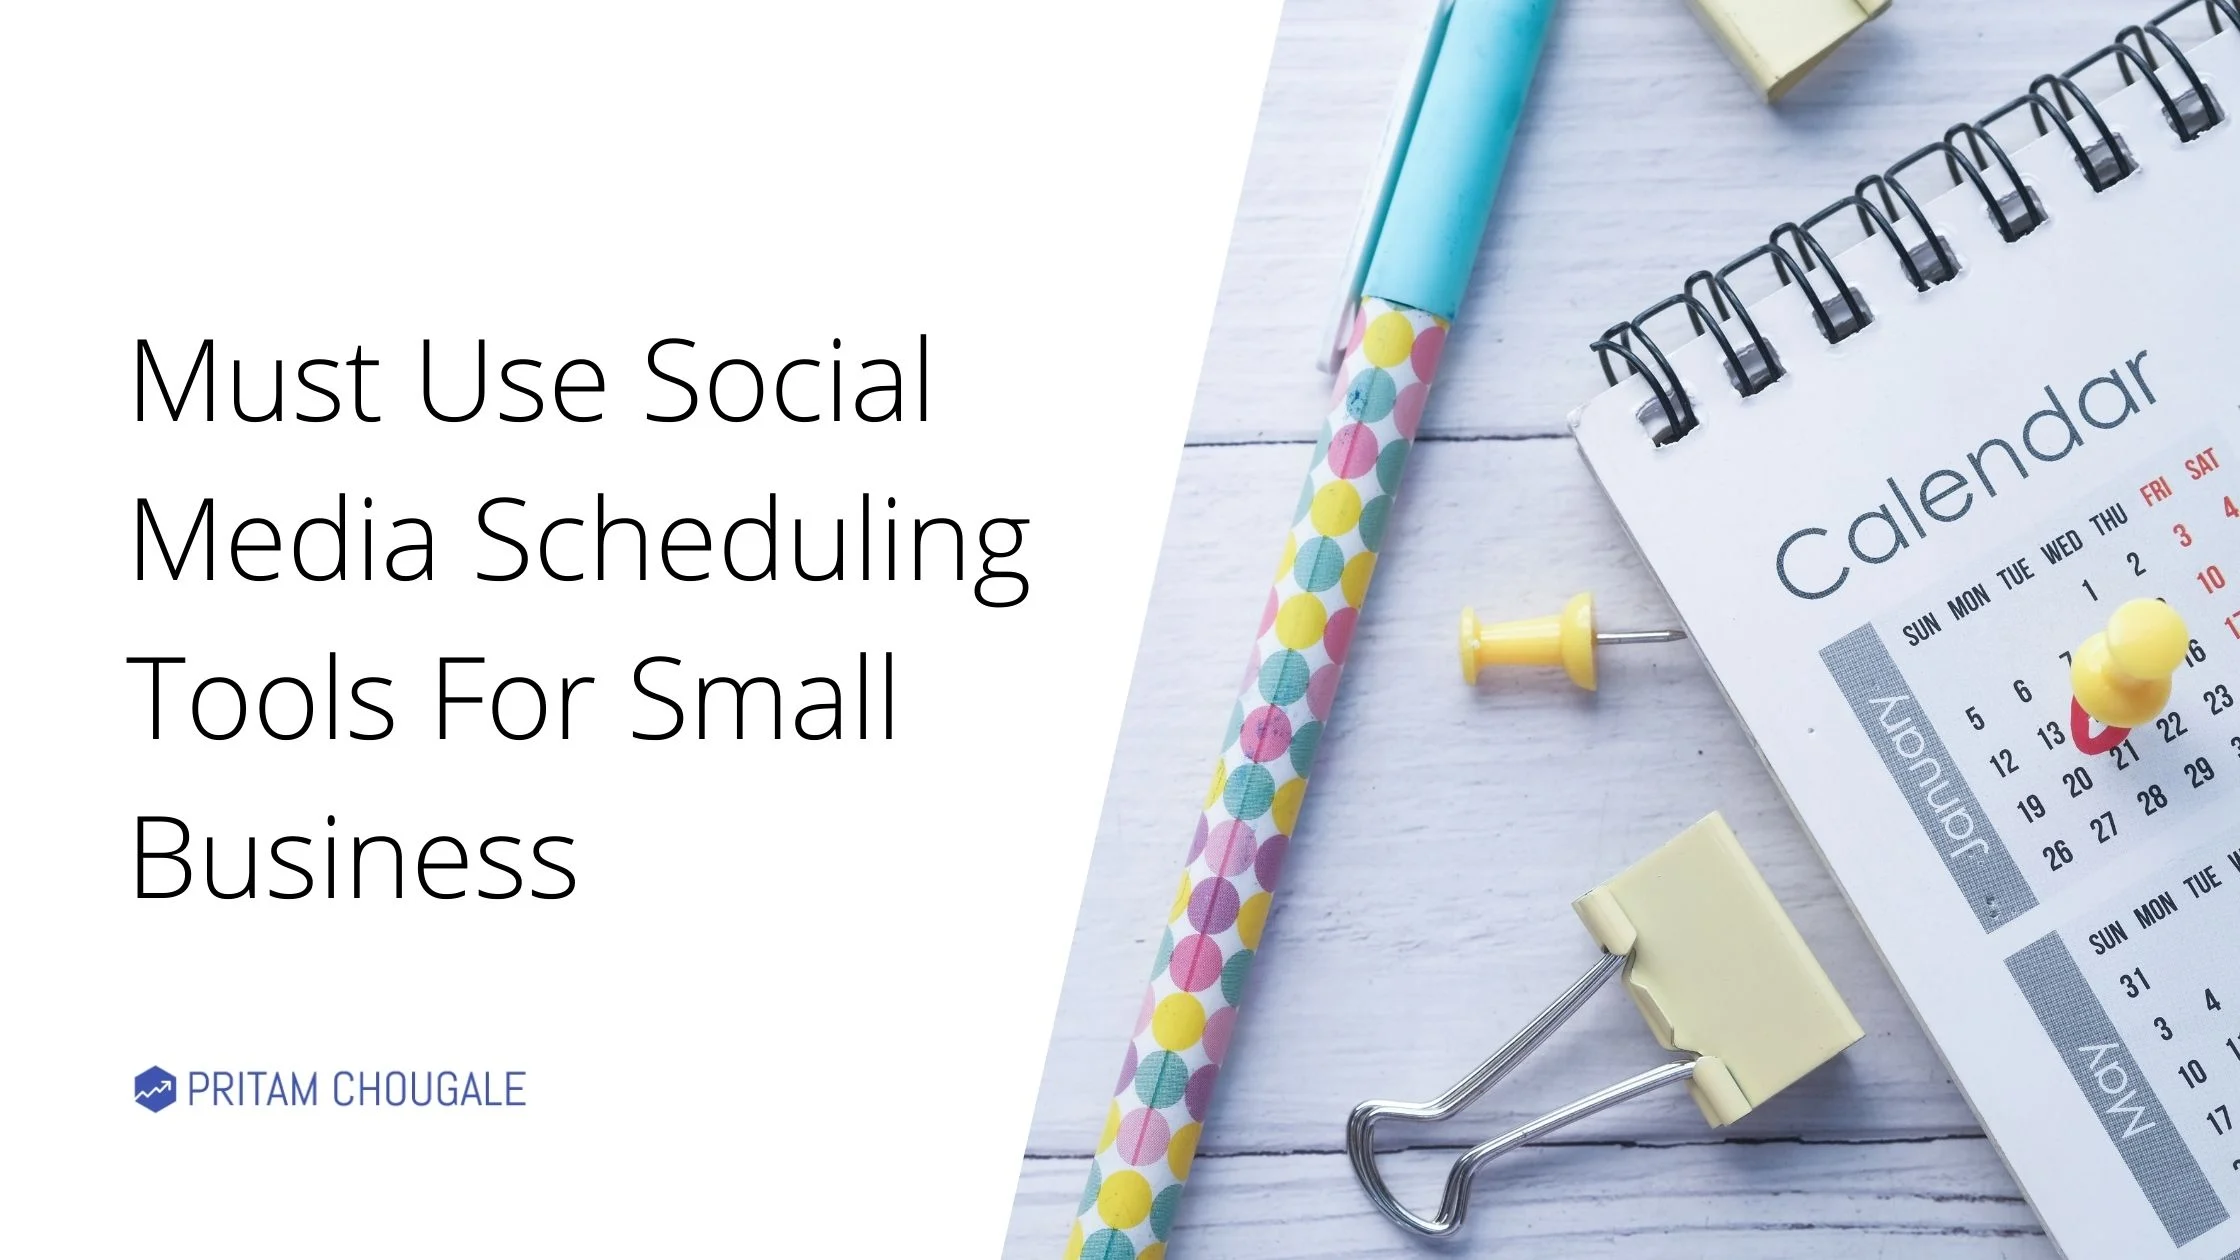 Must Use Social Media Scheduling Tools